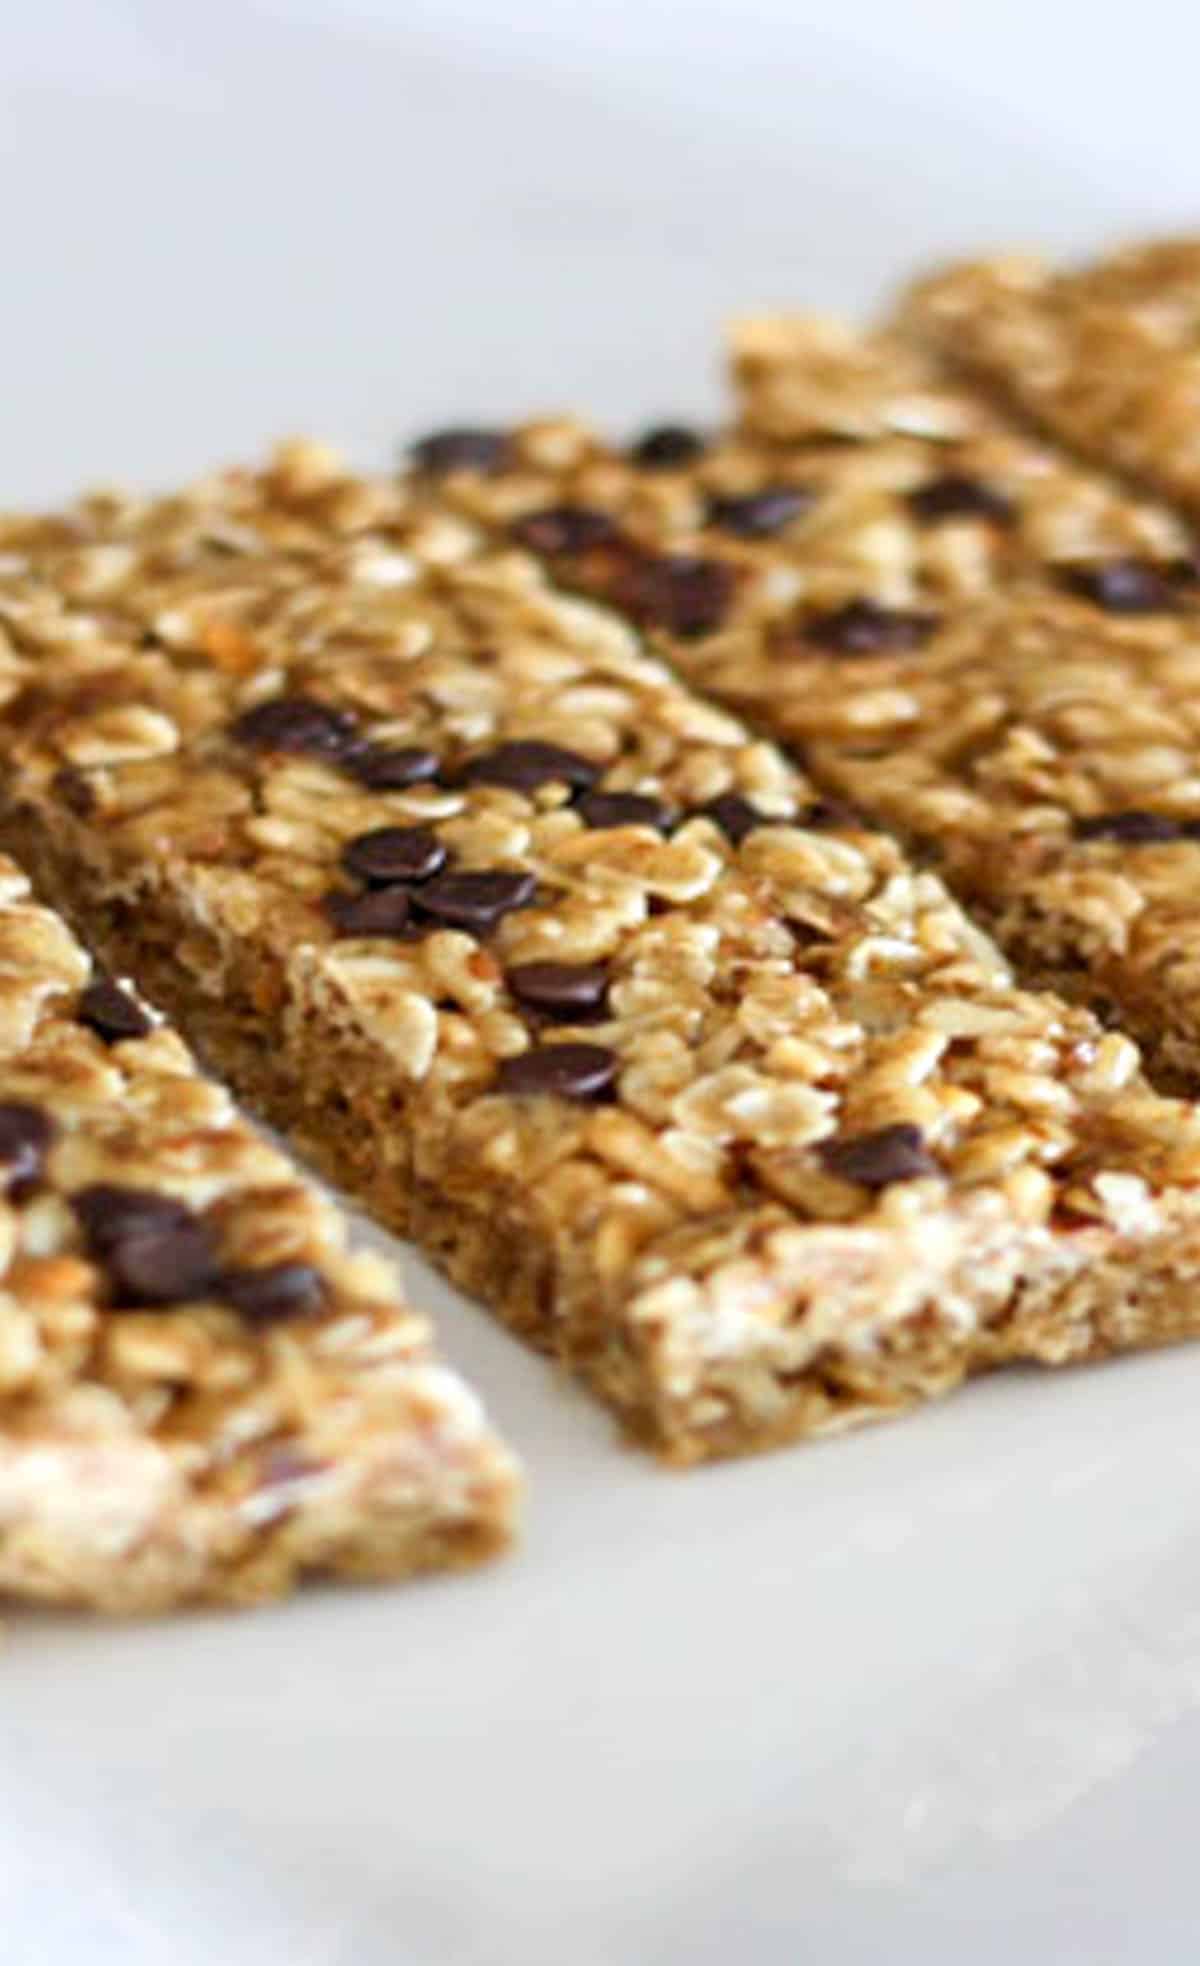 no bake homemade chewy granola bars that use real ingredients like honey, coconut oil, oats, ground flax seeds, and crunchy peanut butter! kid friendly and bars can even be frozen to use later for school lunches!